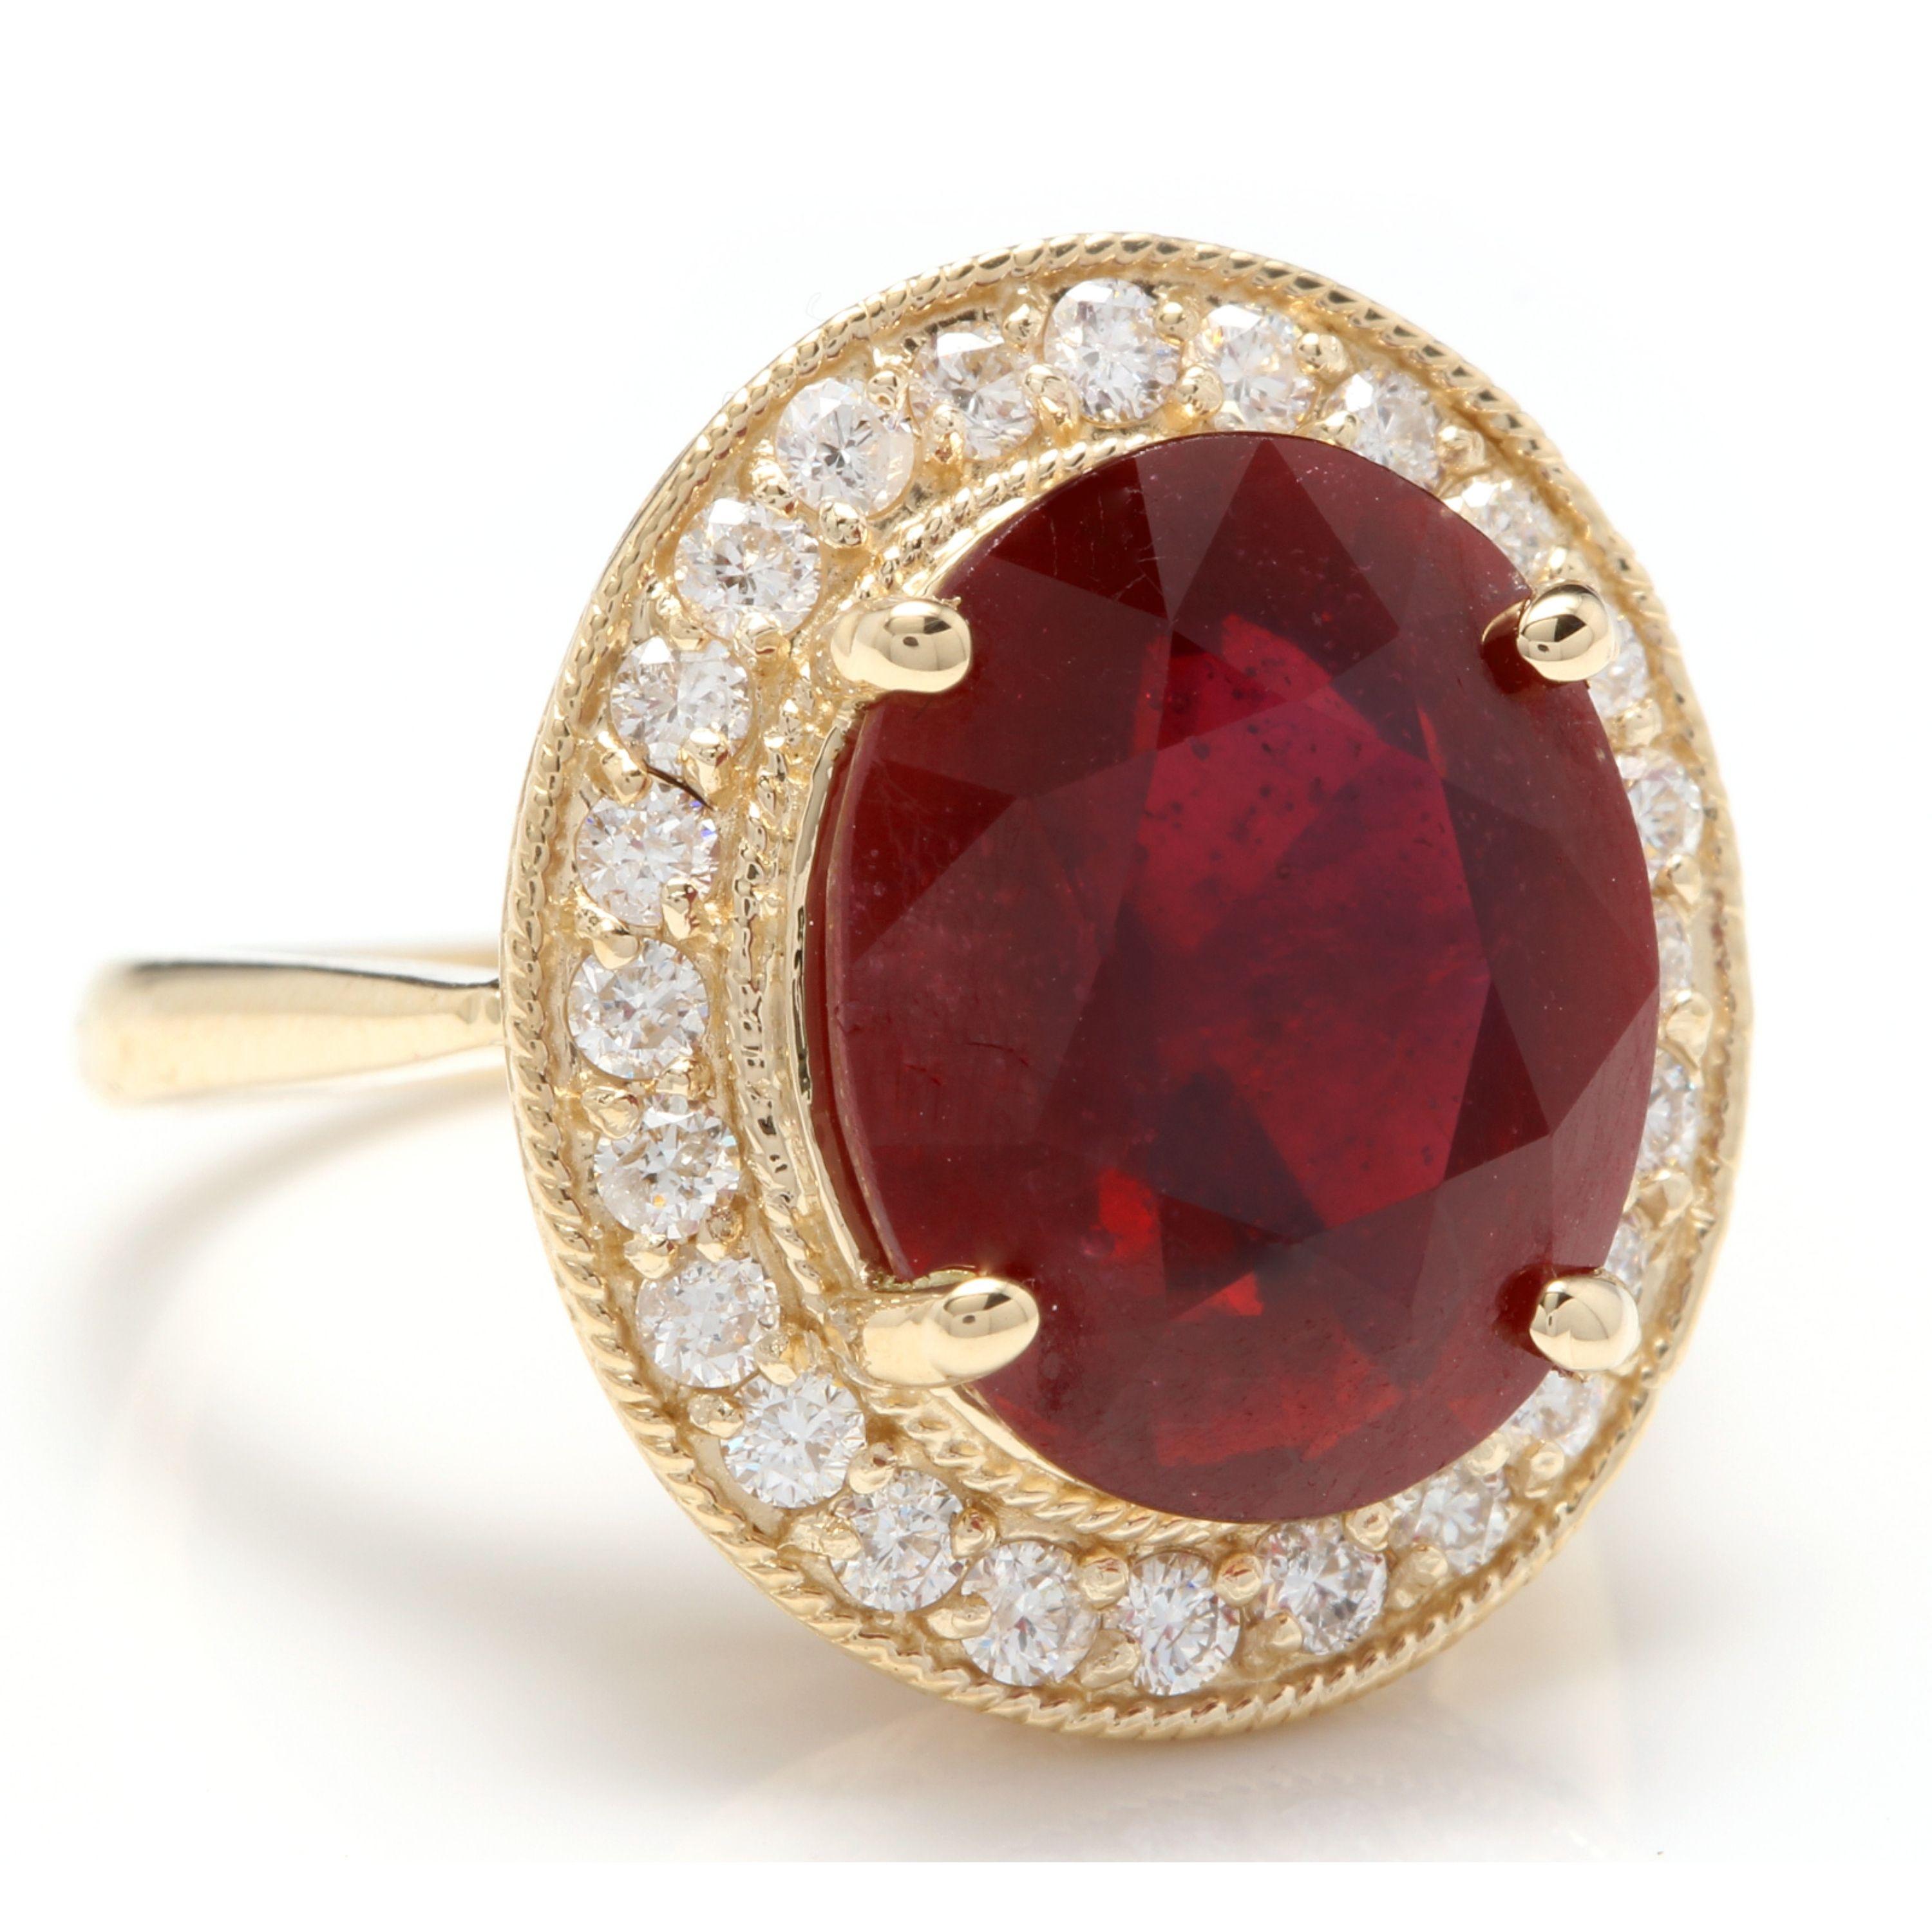 11.75 Carats Impressive Natural Red Ruby and Diamond 14K Yellow Gold Ring

Total Red Ruby Weight is Approx. 11.00 Carats (Lead Glass Filled)

Ruby Measures: Approx. 14.00 x 11.00mm

Natural Round Diamonds Weight: Approx. 0.75 Carats (color G-H /